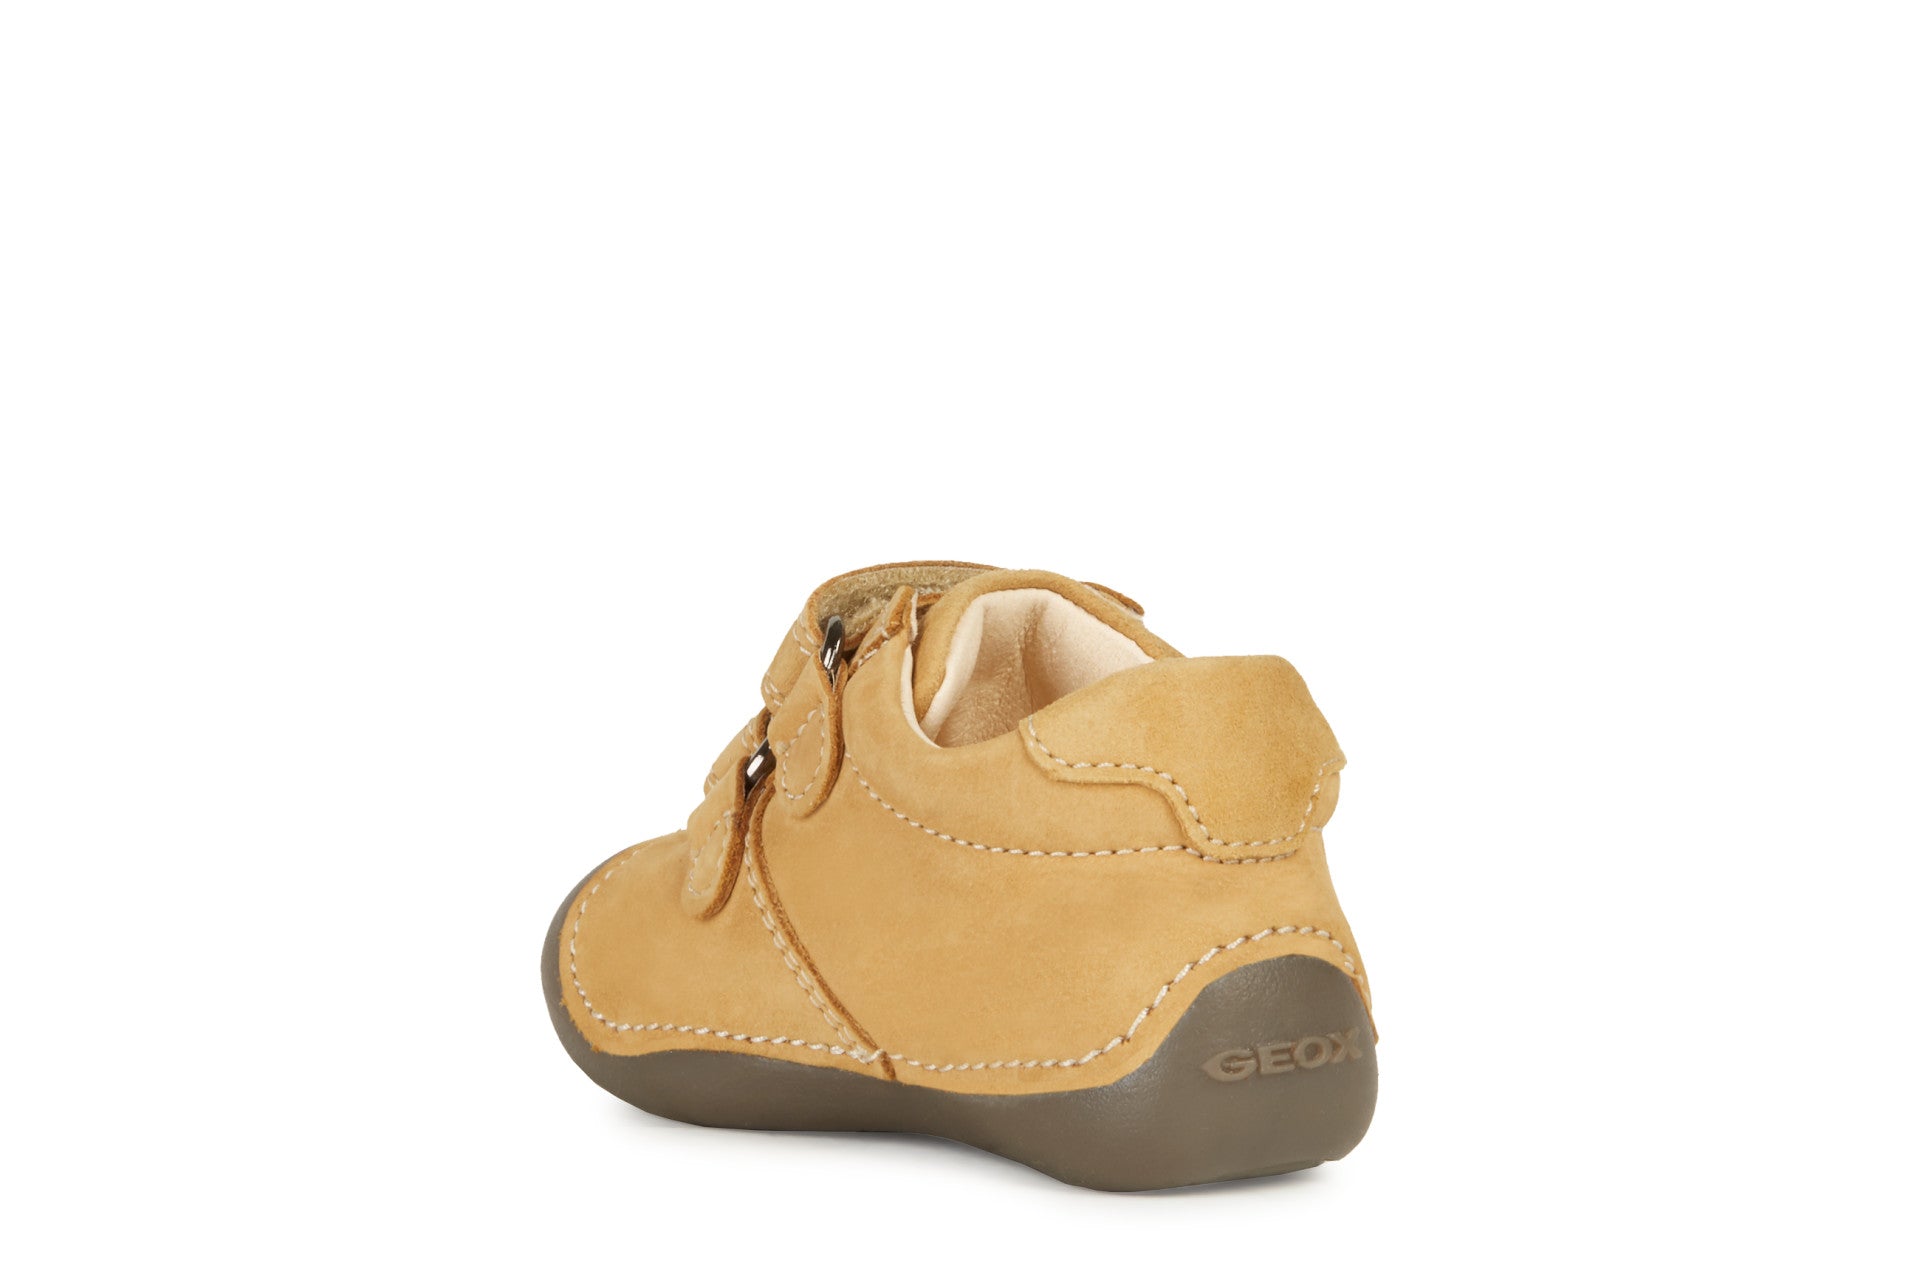 Boys pre walkers by Geox, style B Tutim, in light tan nubuck leather with double velcro fastening. Angled view of left side.